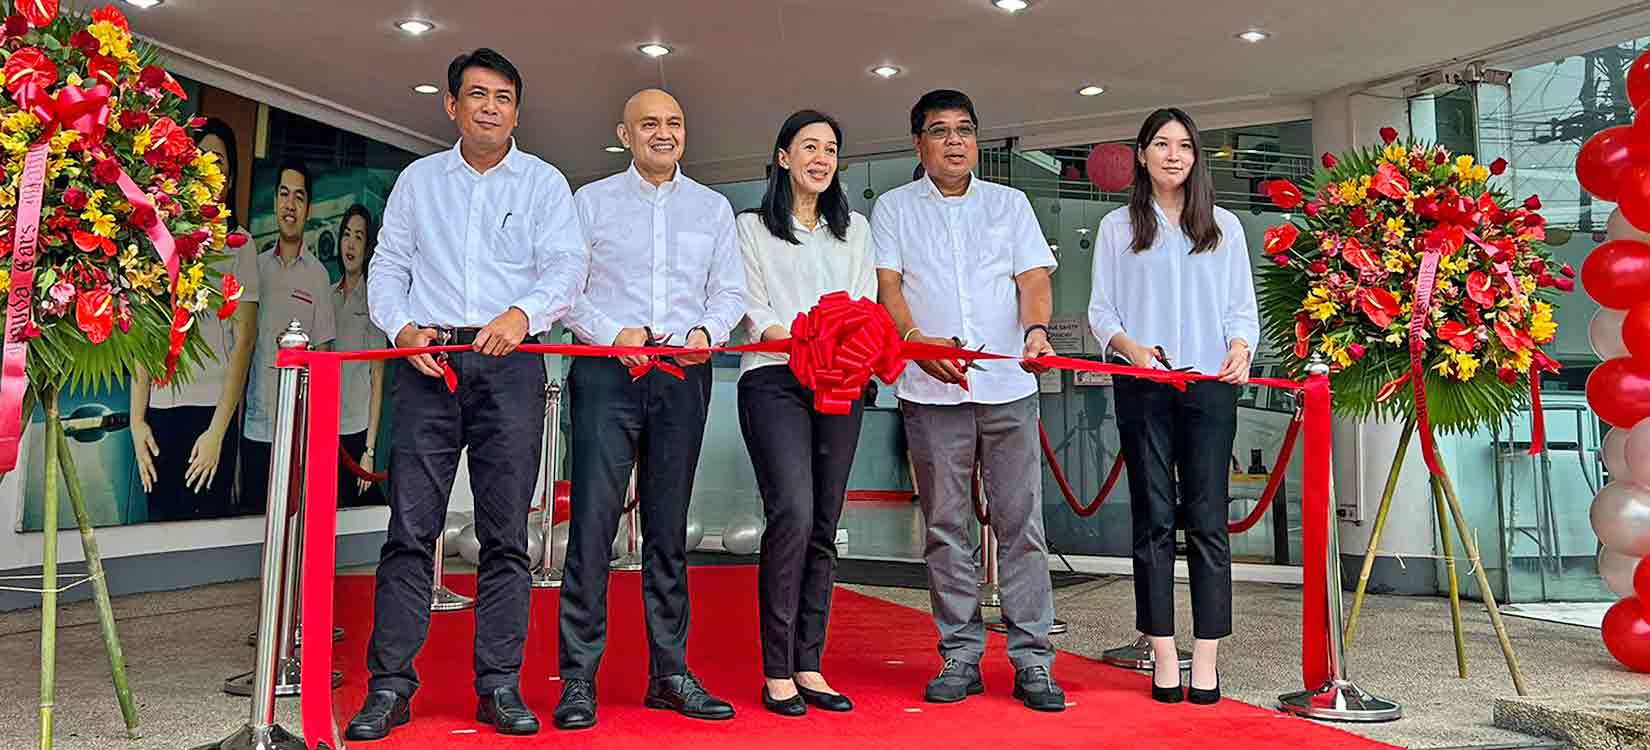 Honda dealers upgrade with new global design â€“  Honda Cars Manila is first to get fresh new look